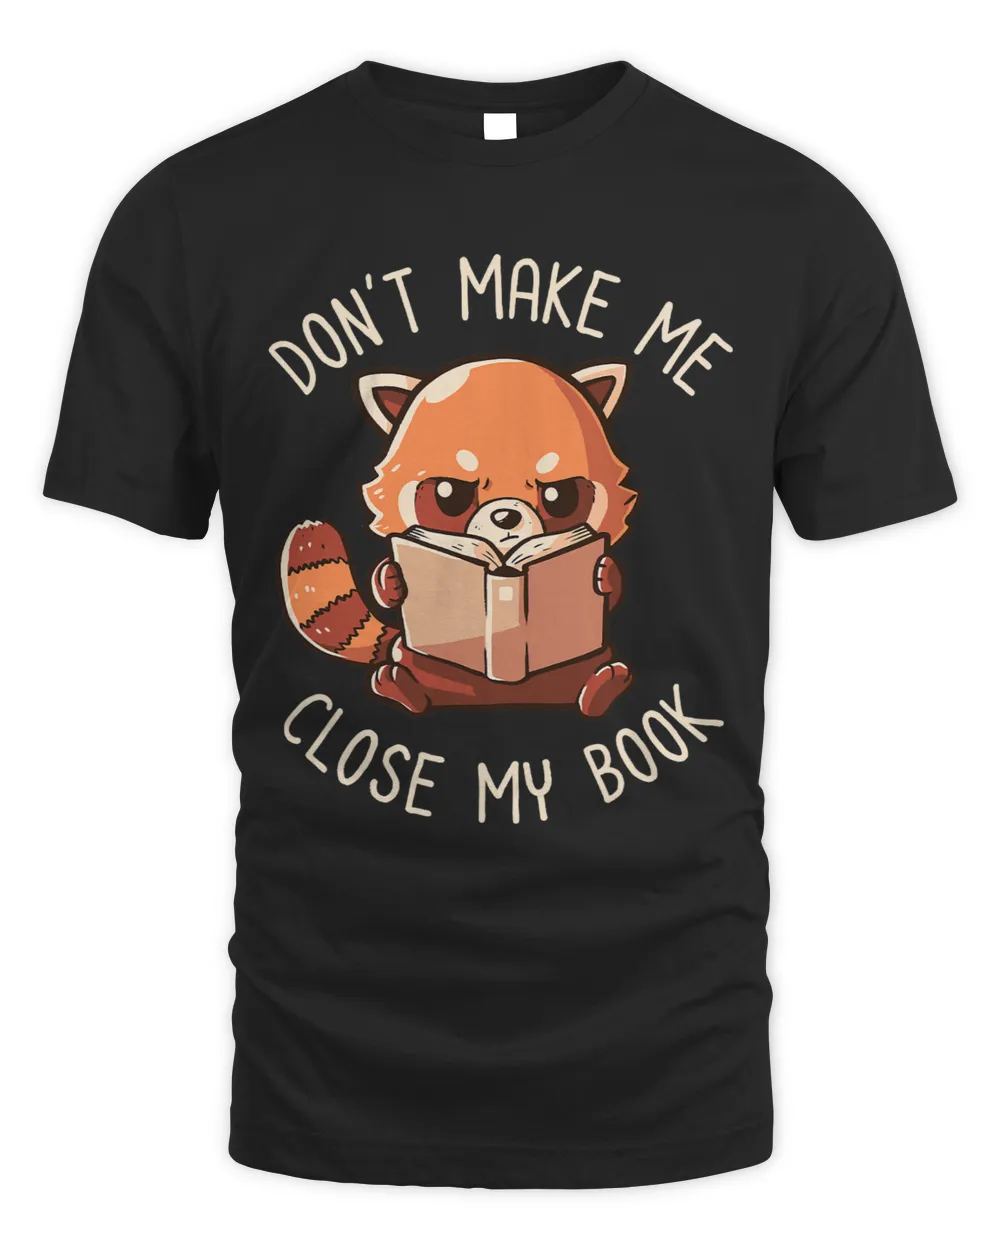 Dont Make Me Close My Book Funny Red Panda Reading